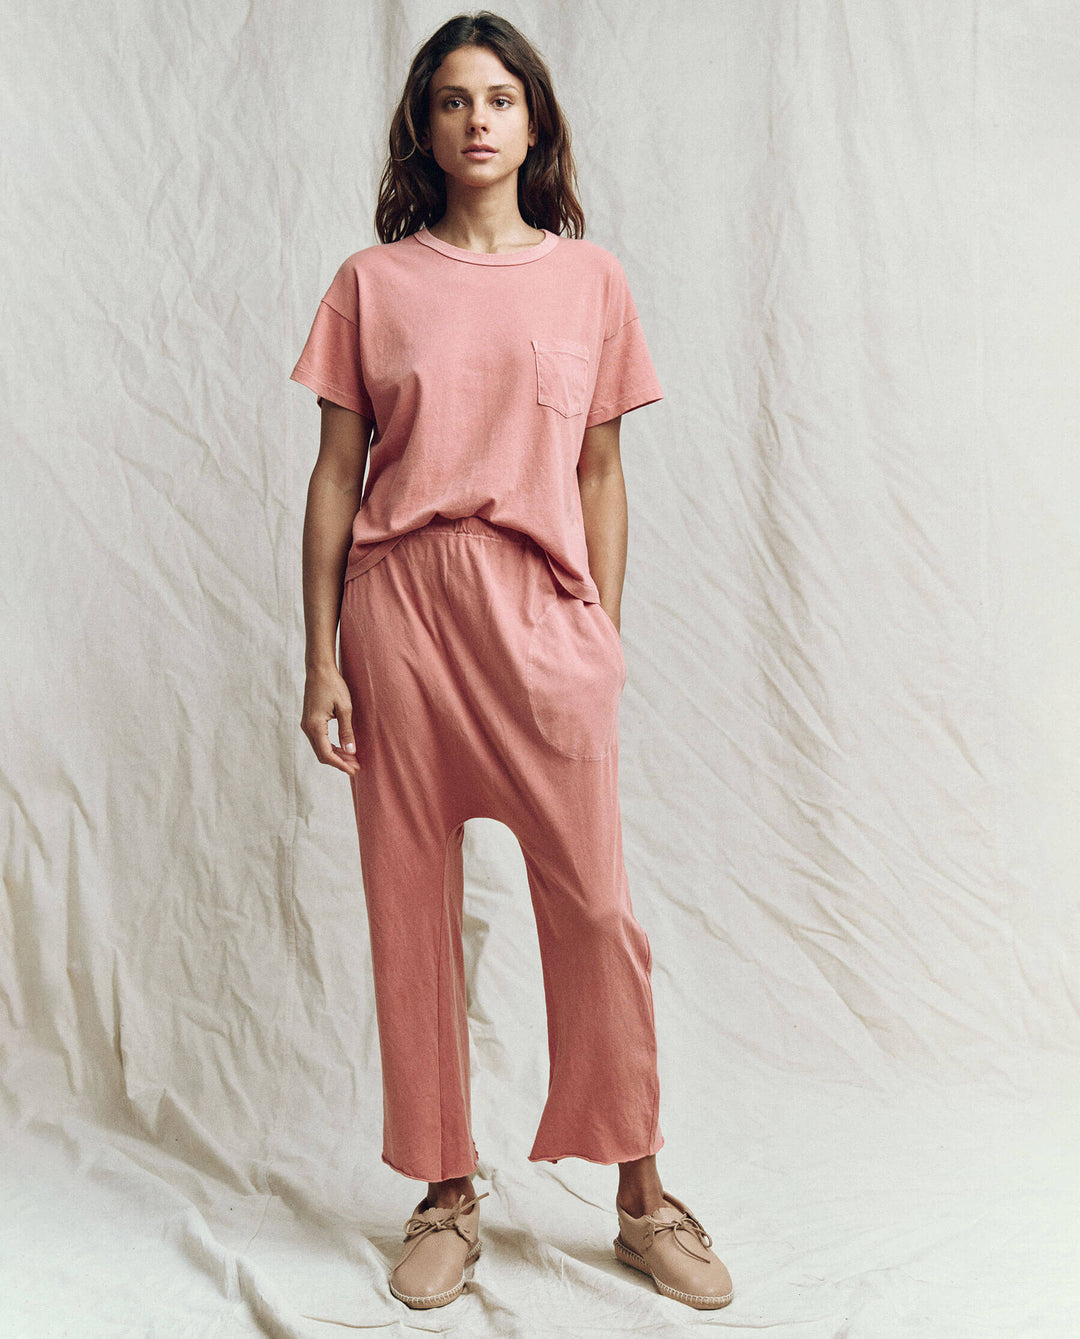 The Great - The Pocket Tee In Rose